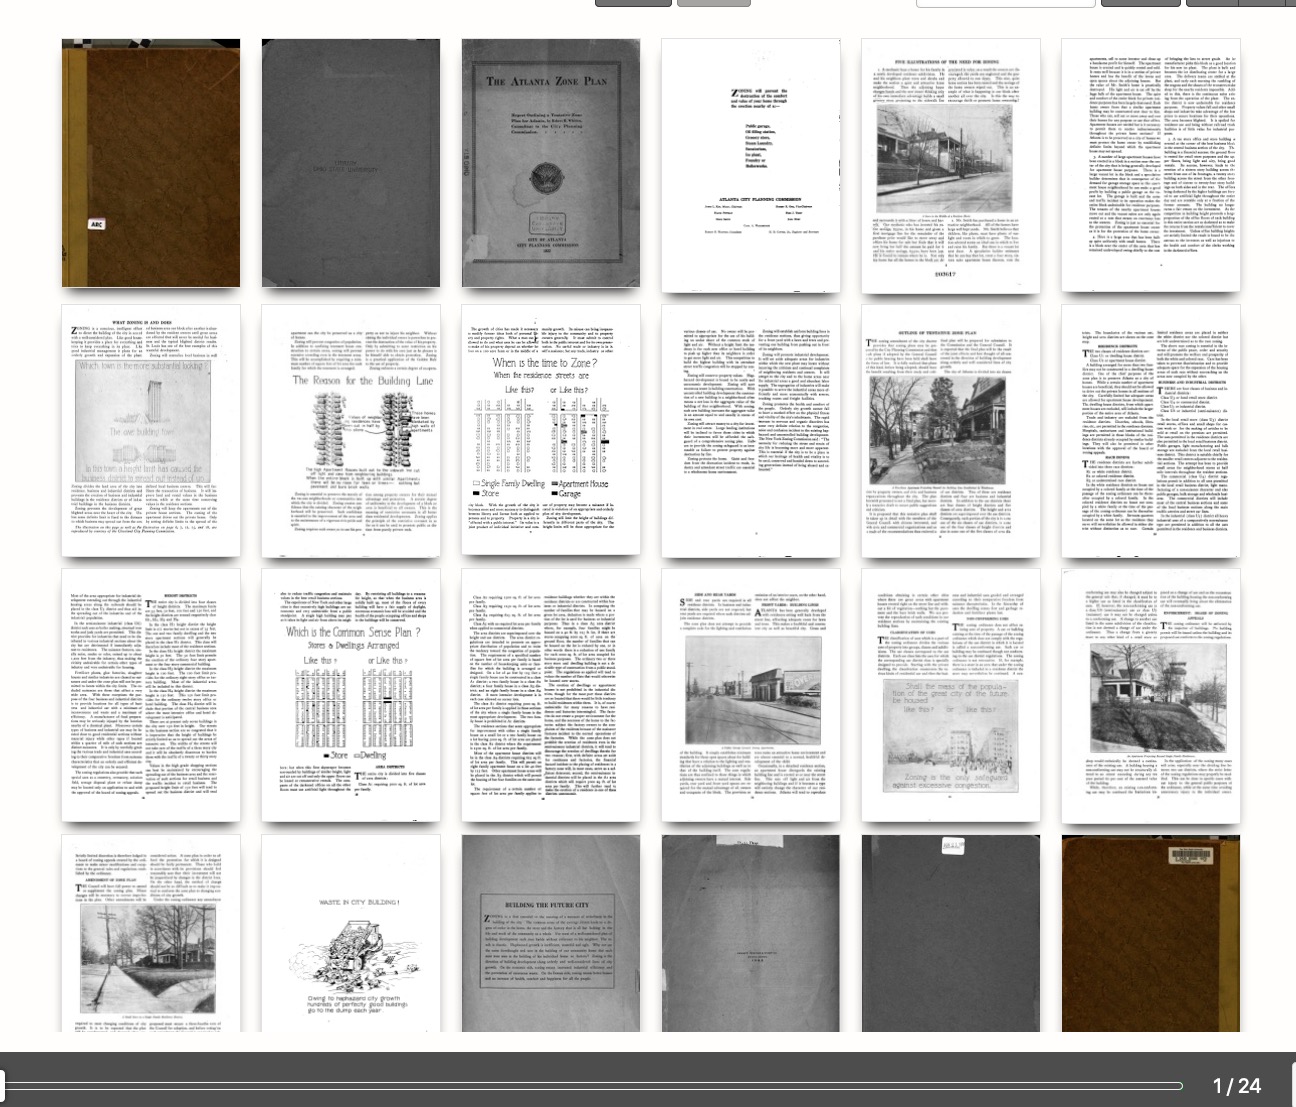 15 pages of text